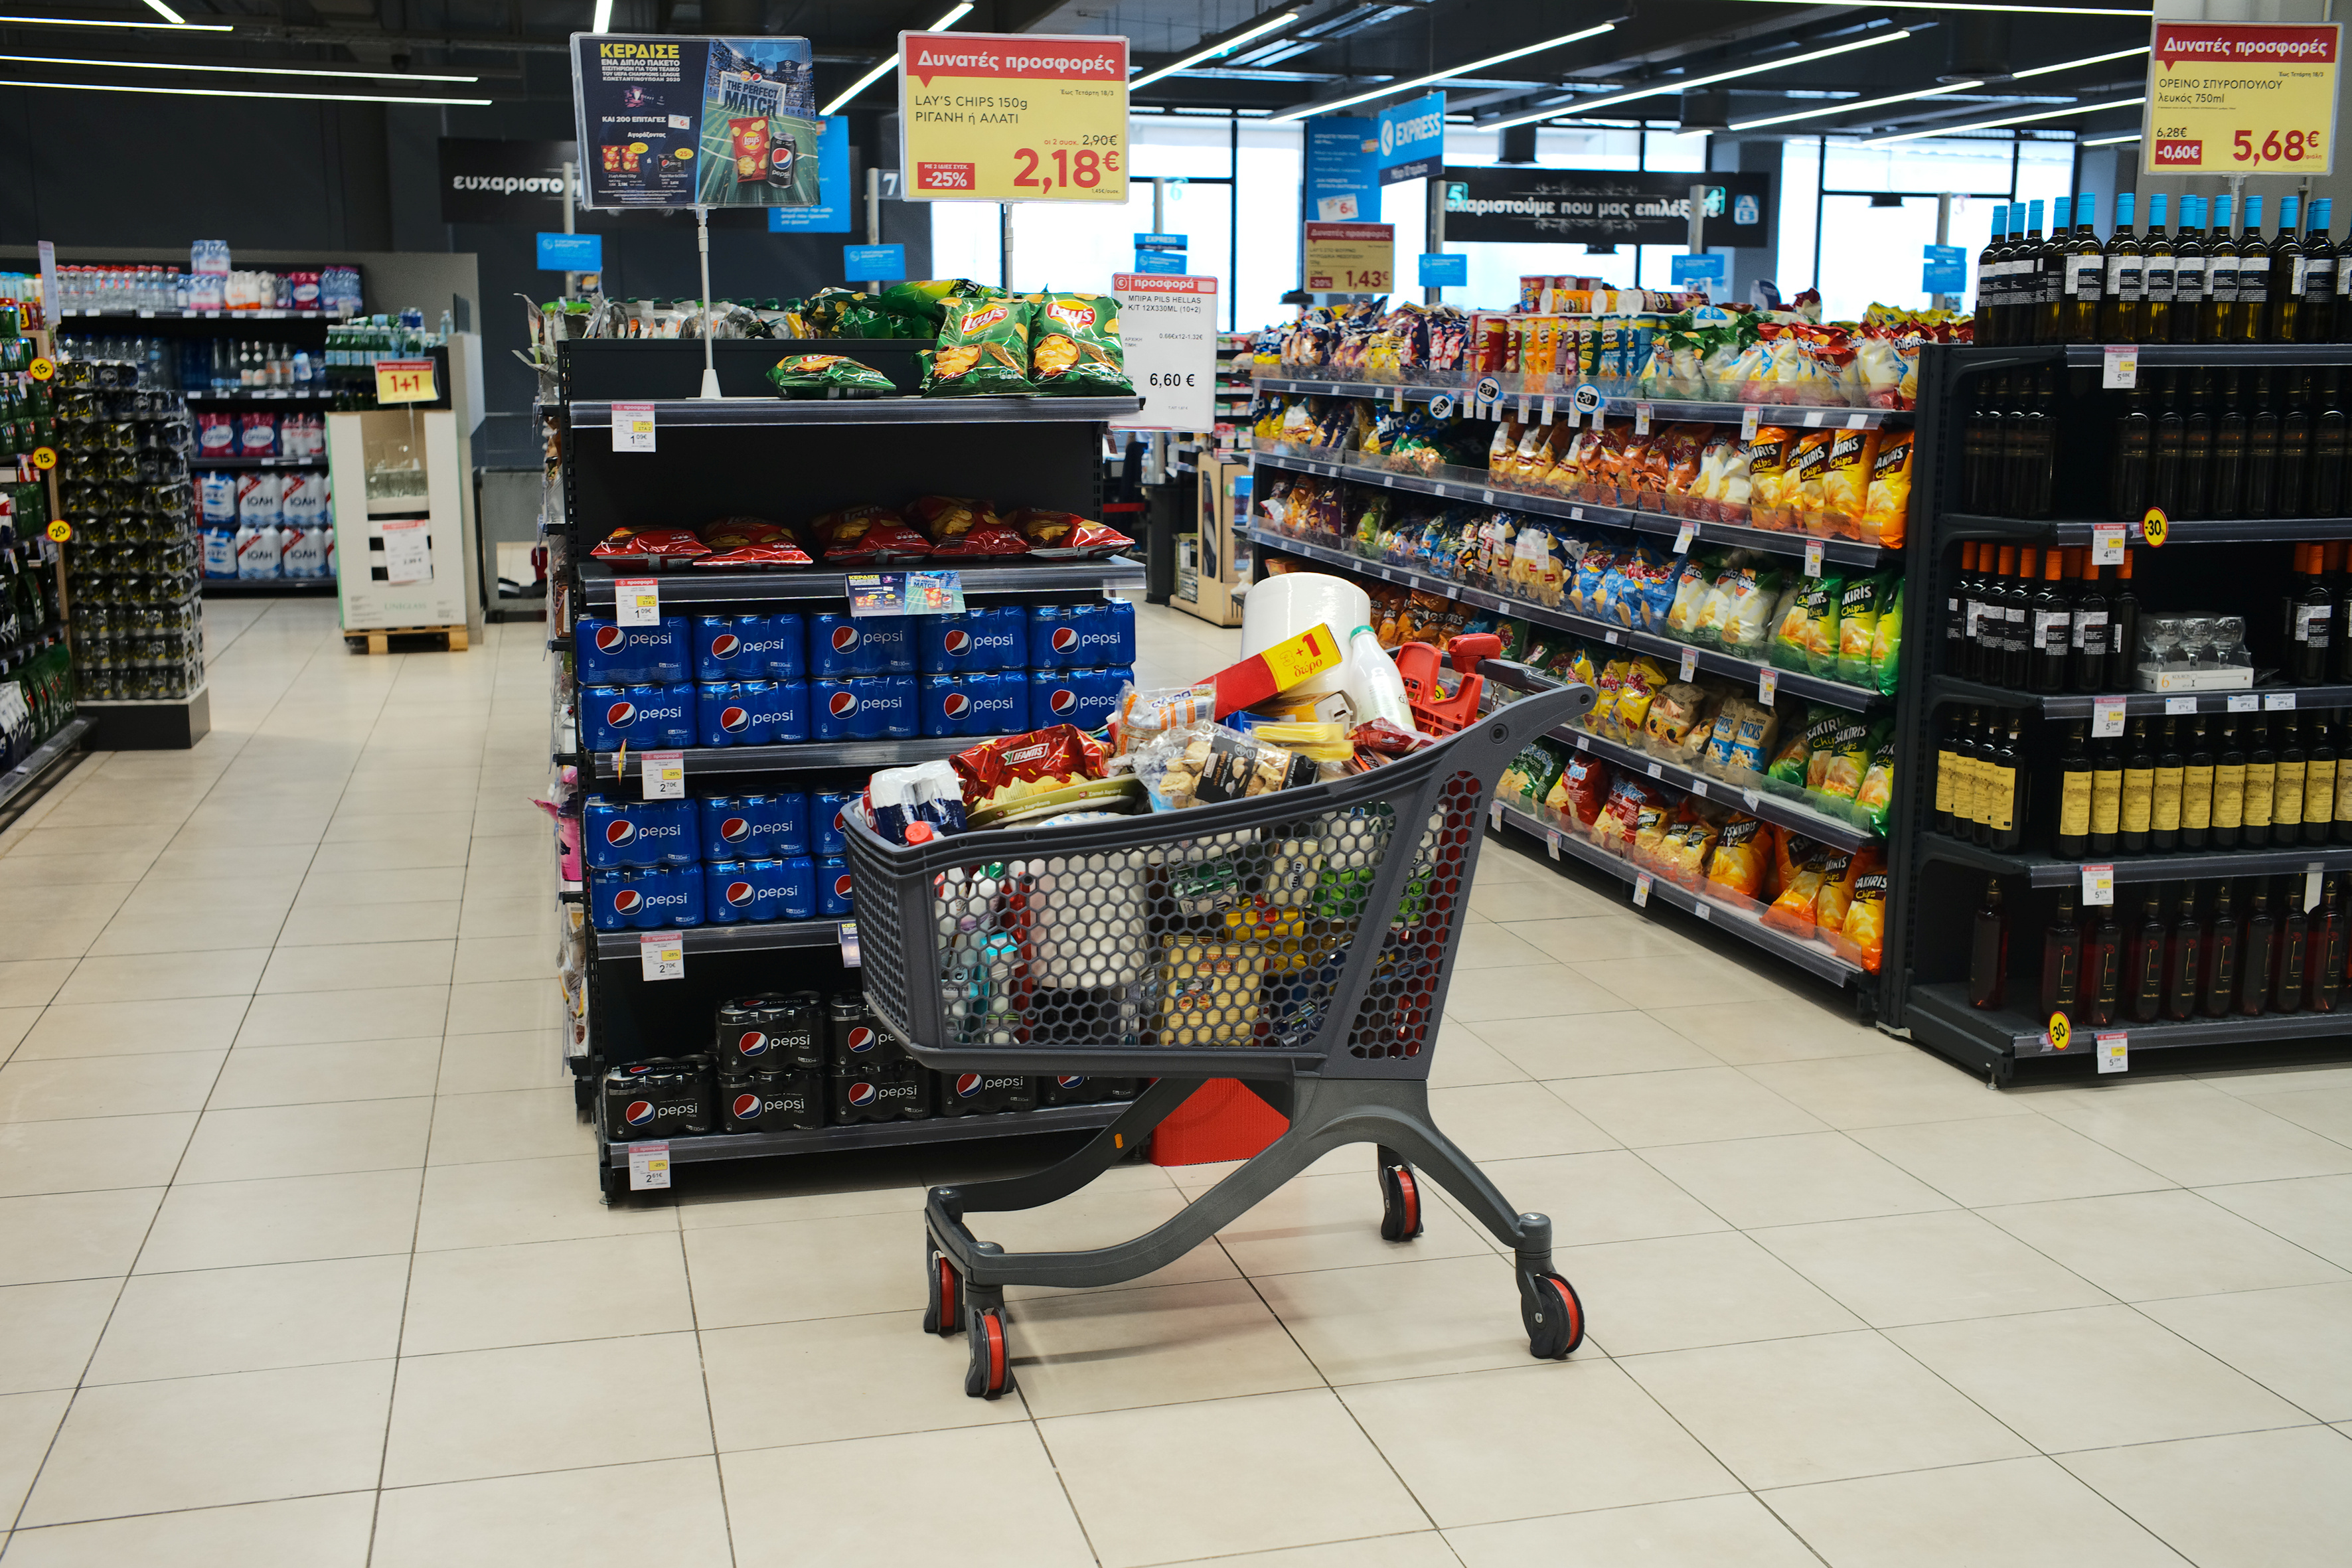 A shopping cart is seen full of goods in a super market in Athens